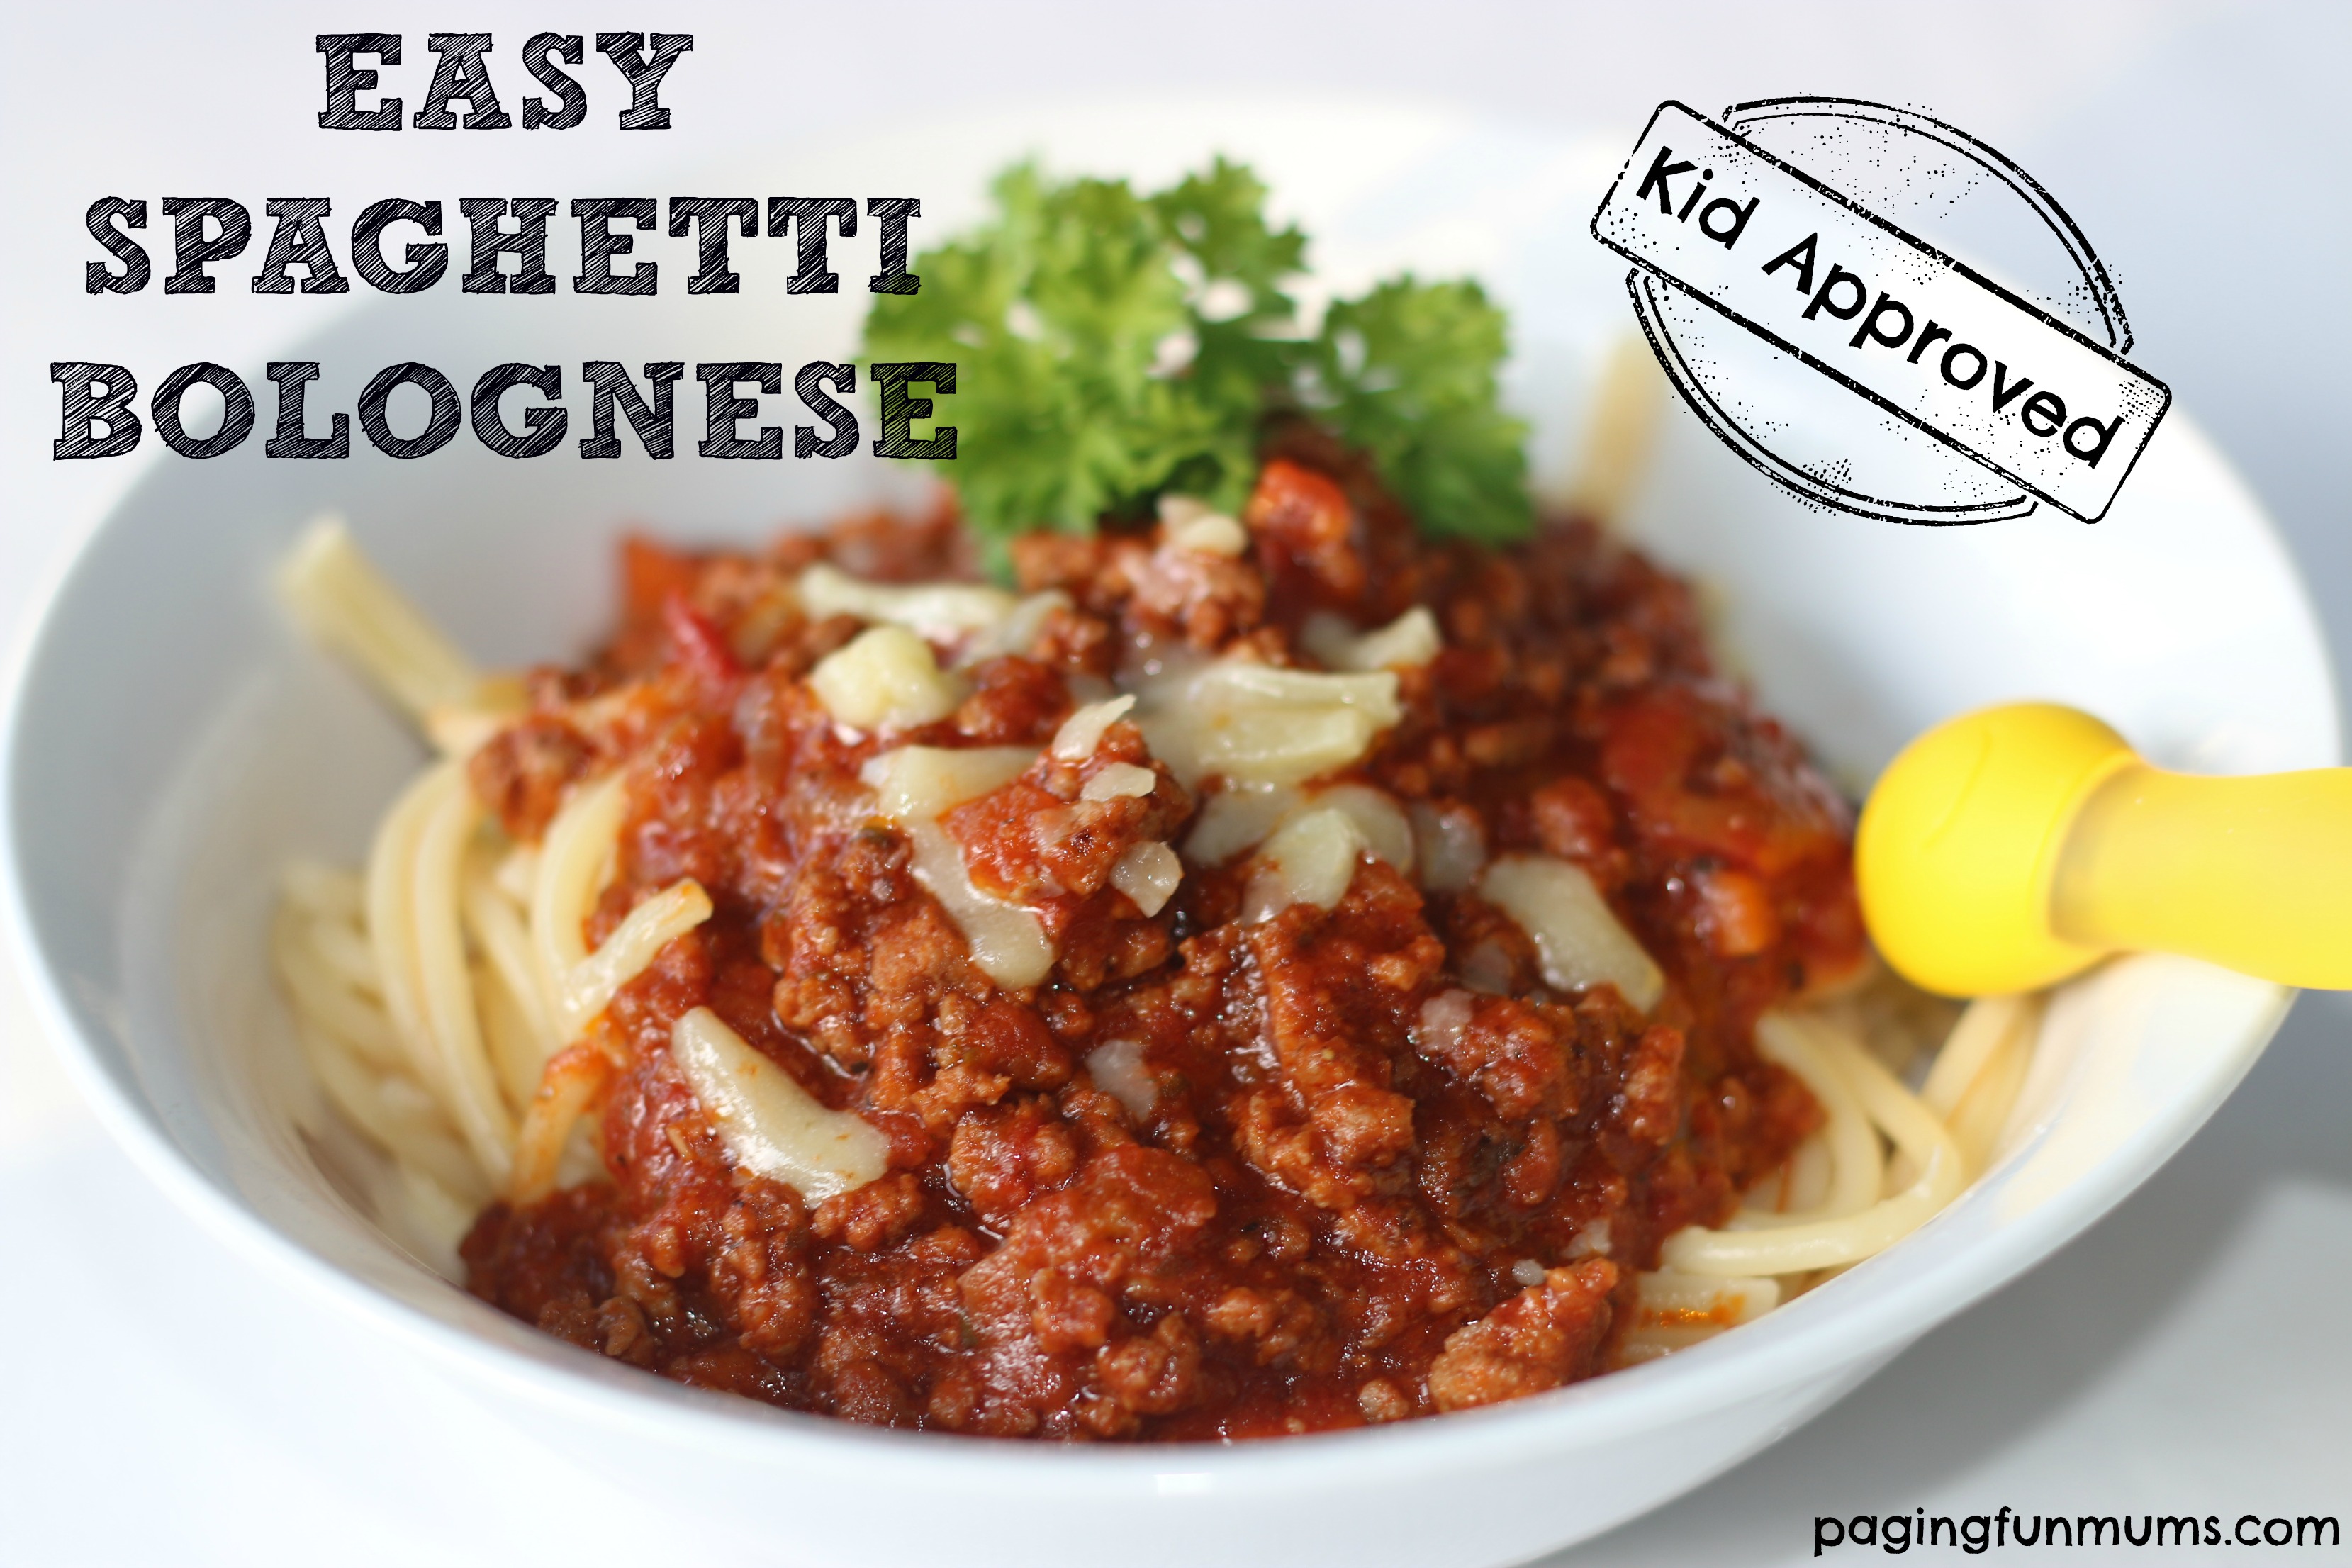 Easy Spaghetti Bolognese Recipe that our familiy loves!